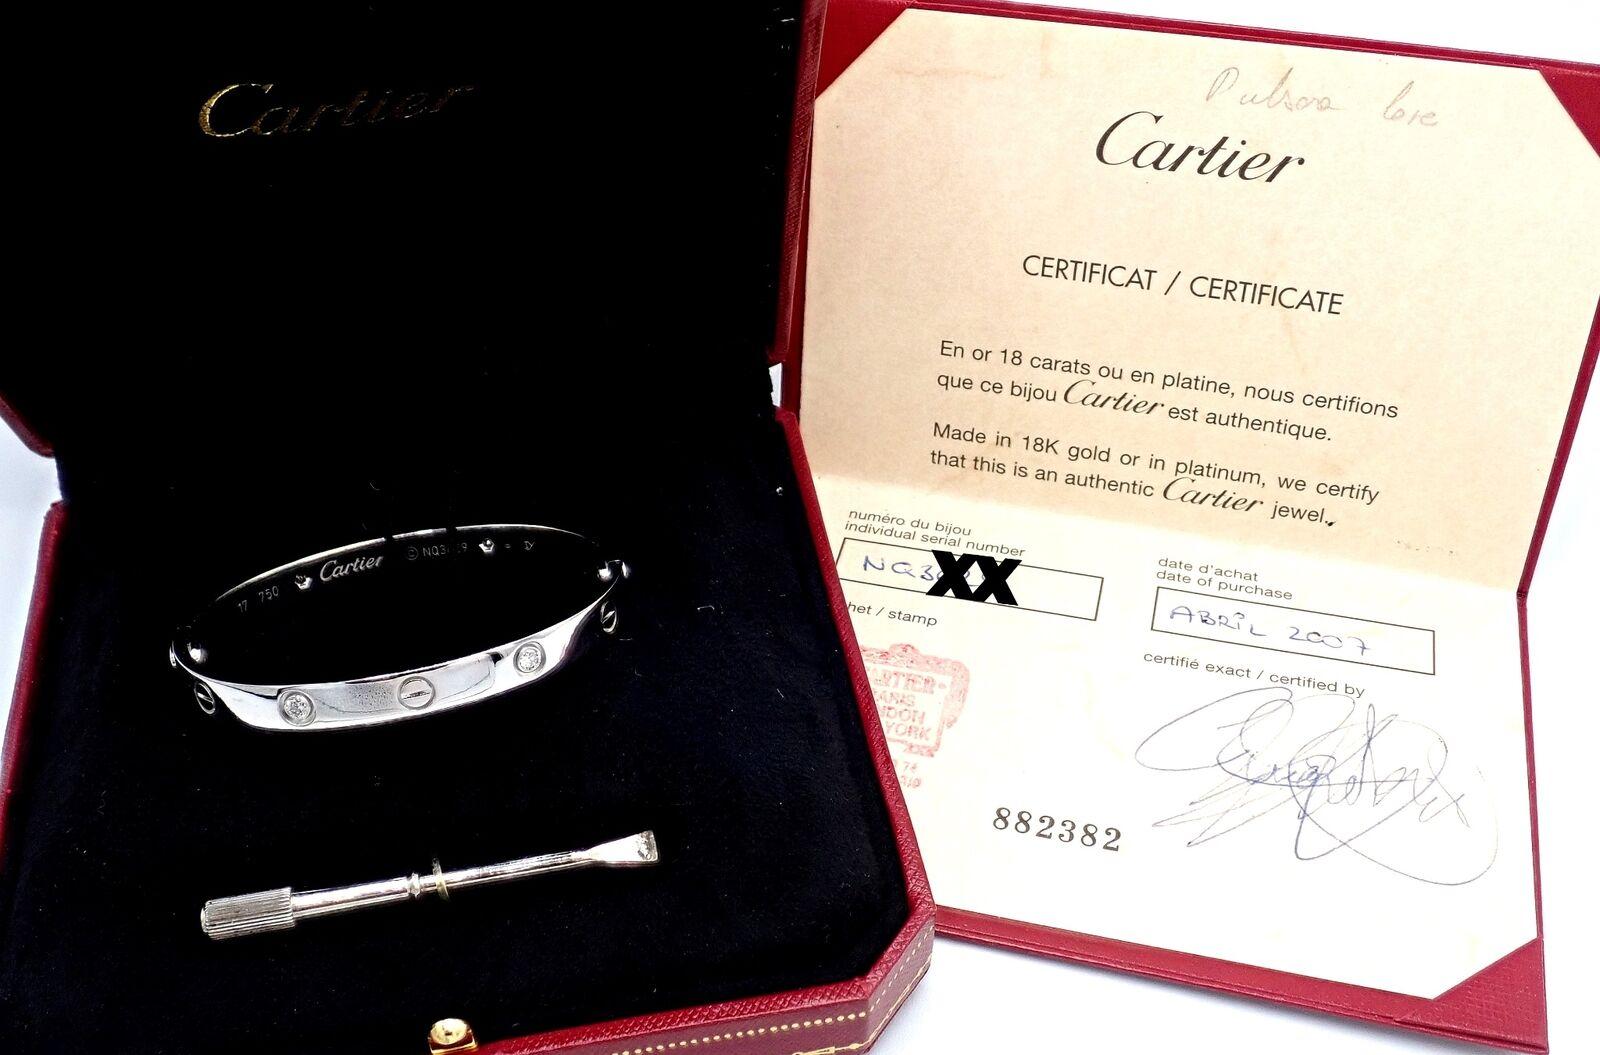 18k White Gold Cartier LOVE Bangle Bracelet, size 17.
With 4 round brilliant cut diamonds VS1 clarity, G color total weight .42ct
This bracelet comes with Cartier certificate of authenticity, Cartier box and a screwdriver.
This bracelet has an old